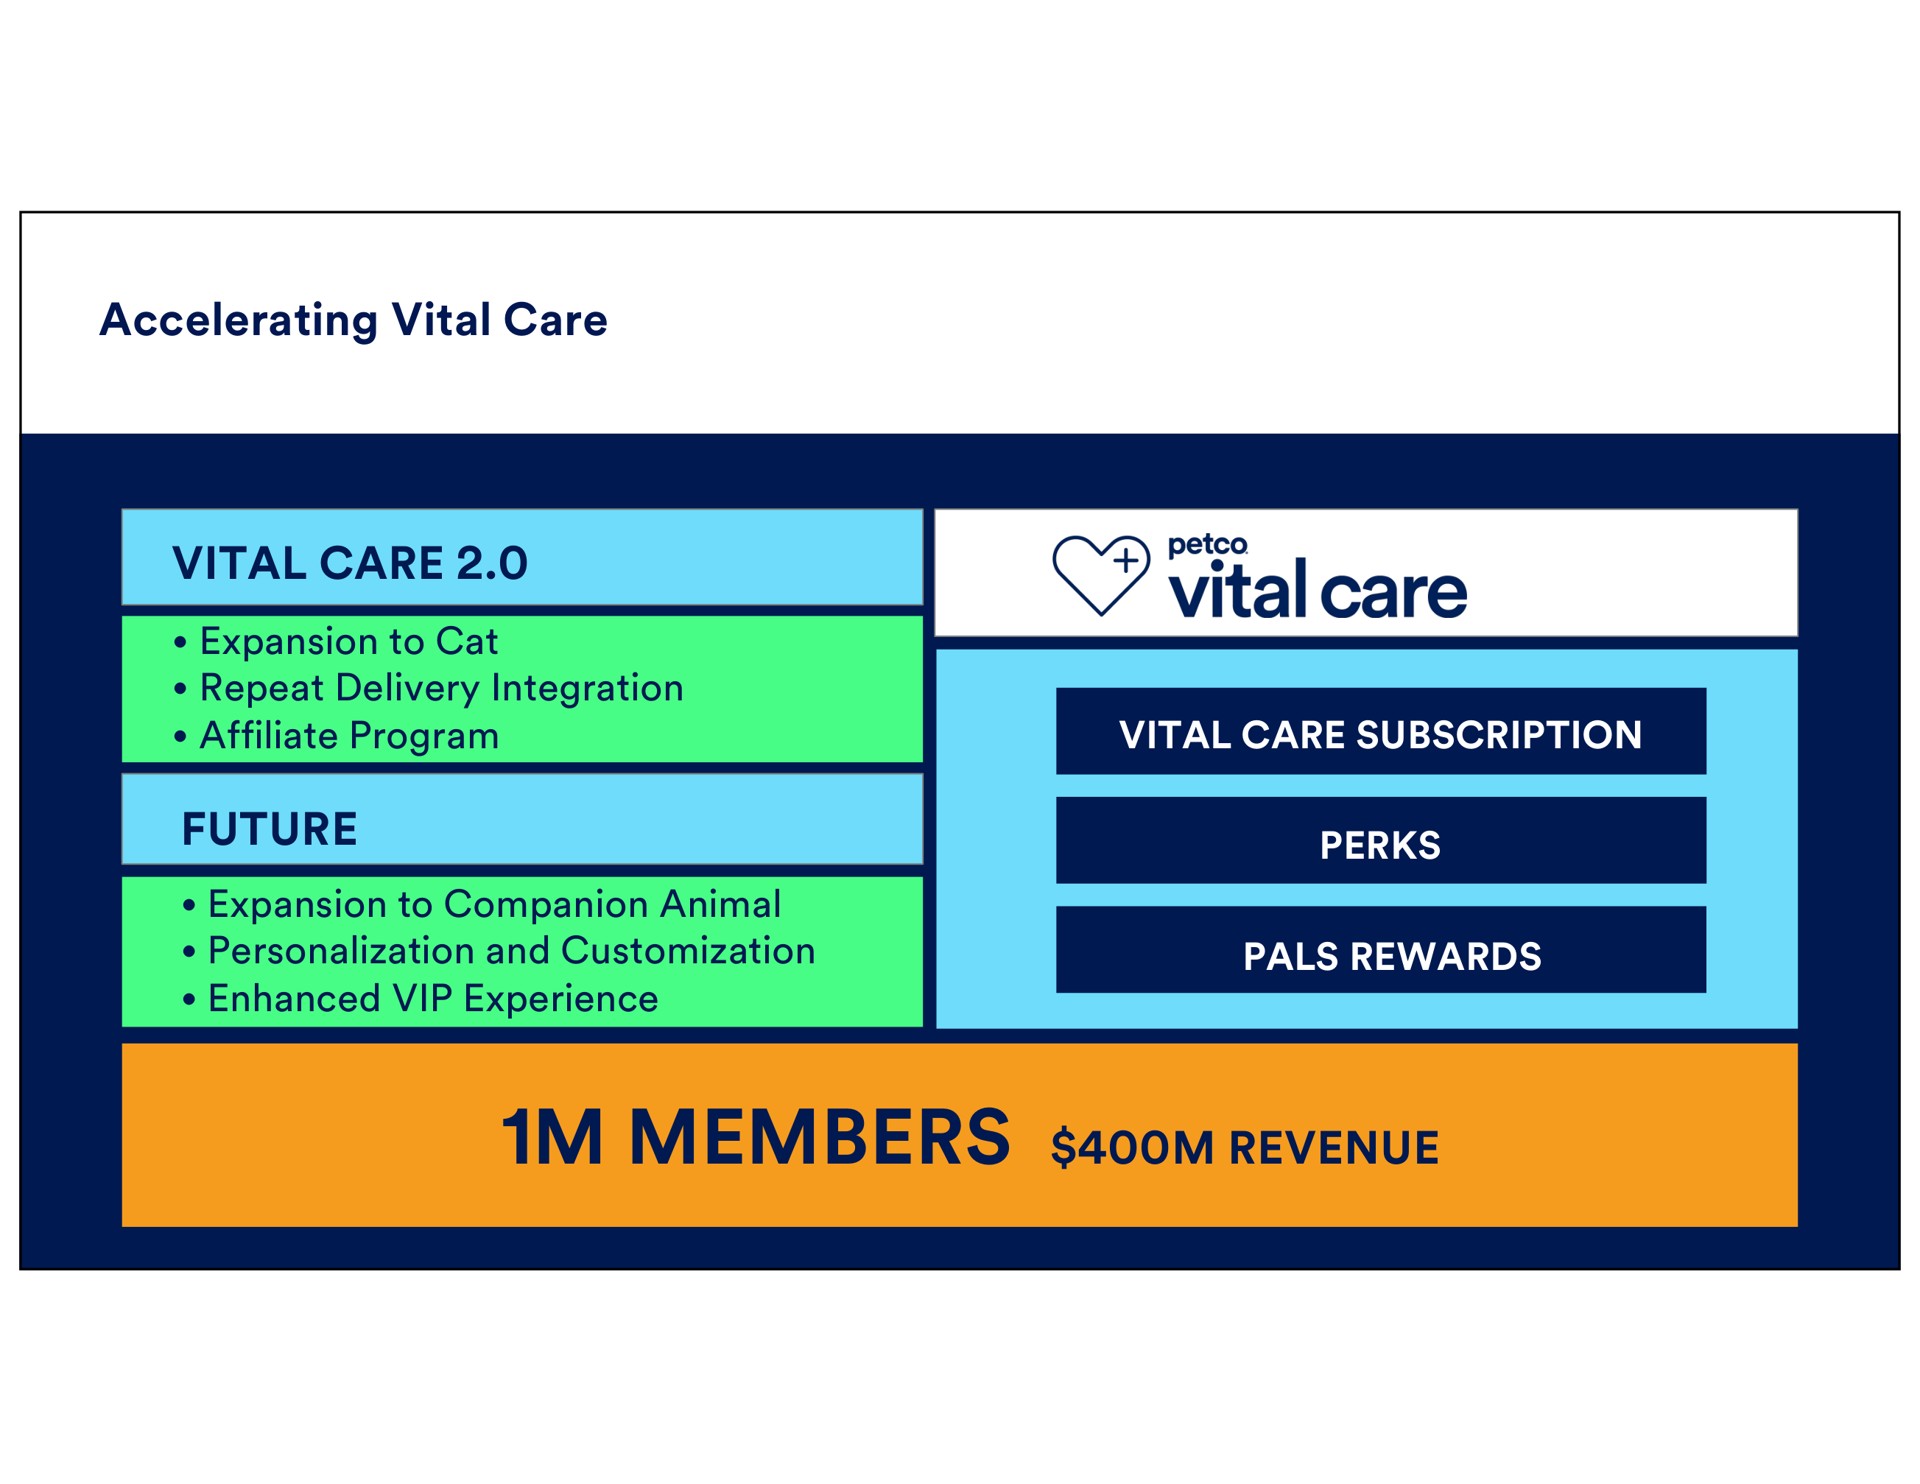 accelerating vital care vital care future members revenue expansion to cat repeat delivery integration affiliate program subscription expansion to companion animal personalization and enhanced experience pals rewards | Petco